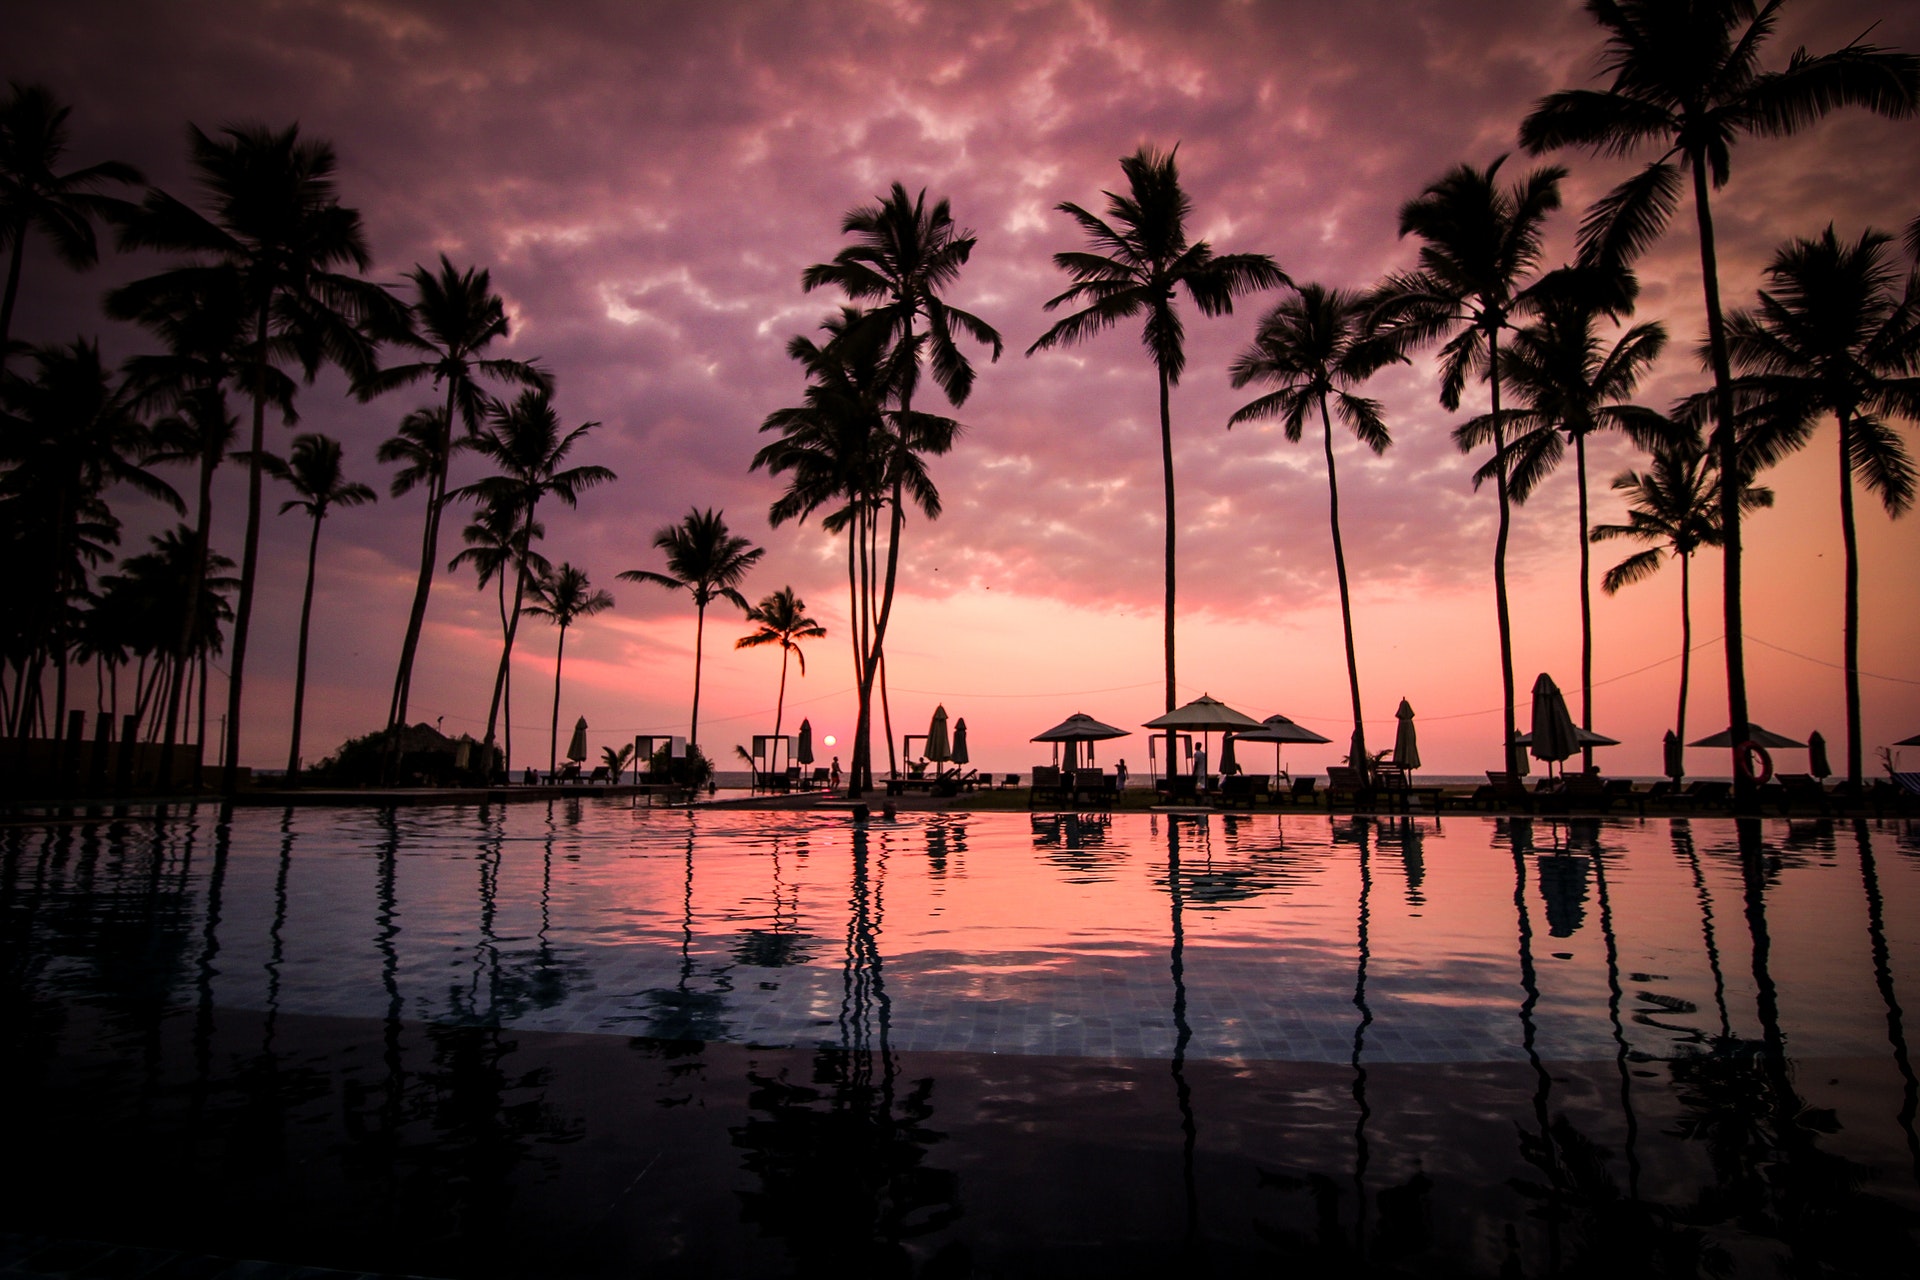 Beach and palm trees in hawaii.